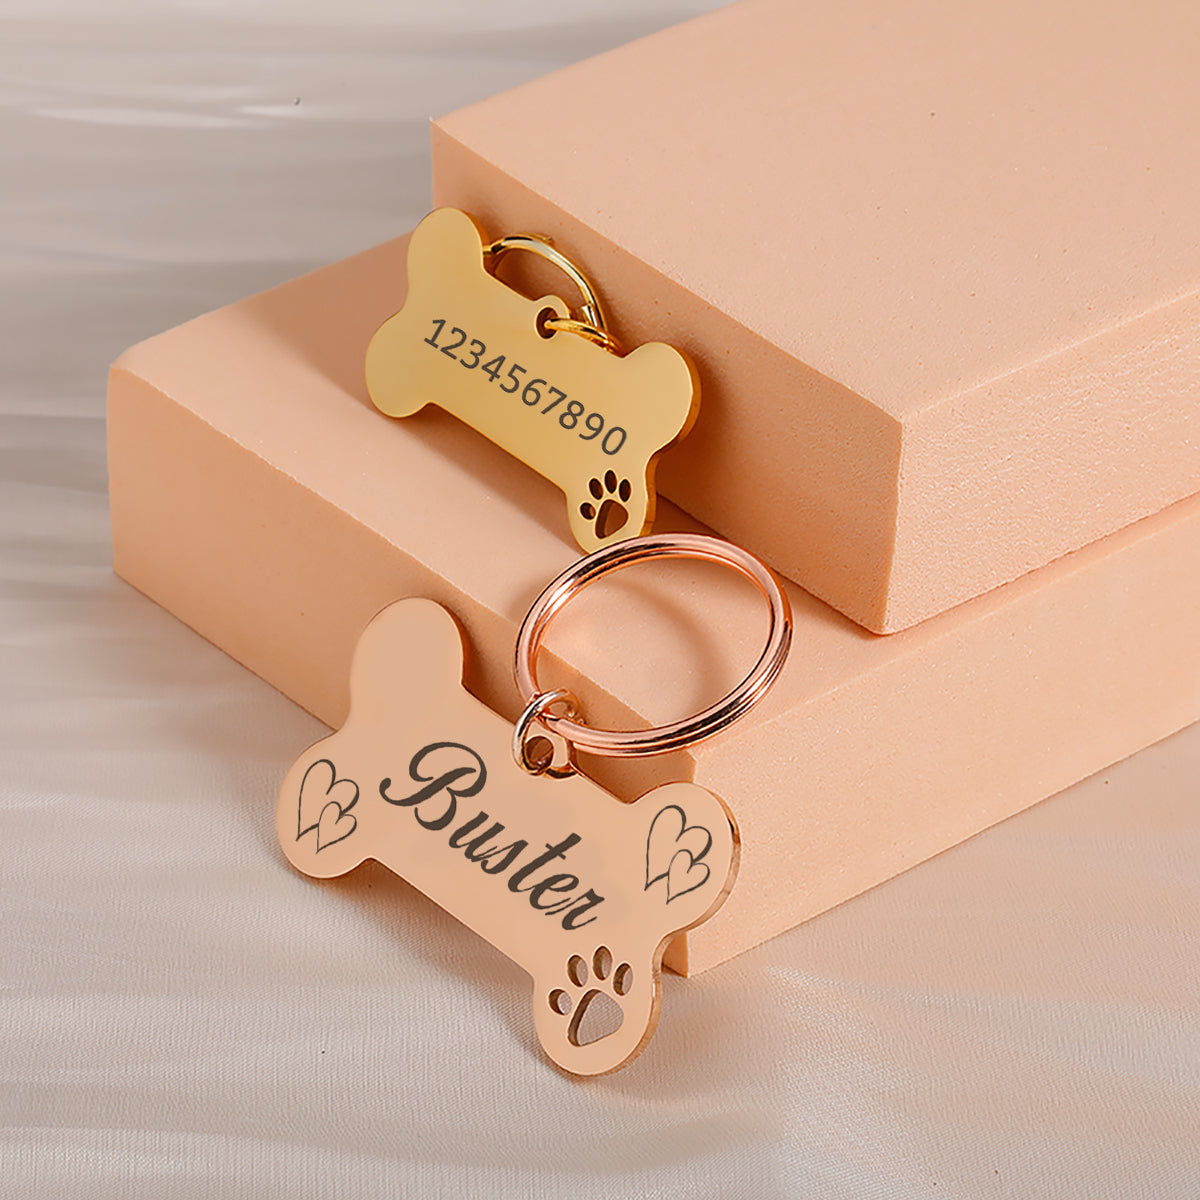 Personalized Engraved Pet ID Tag